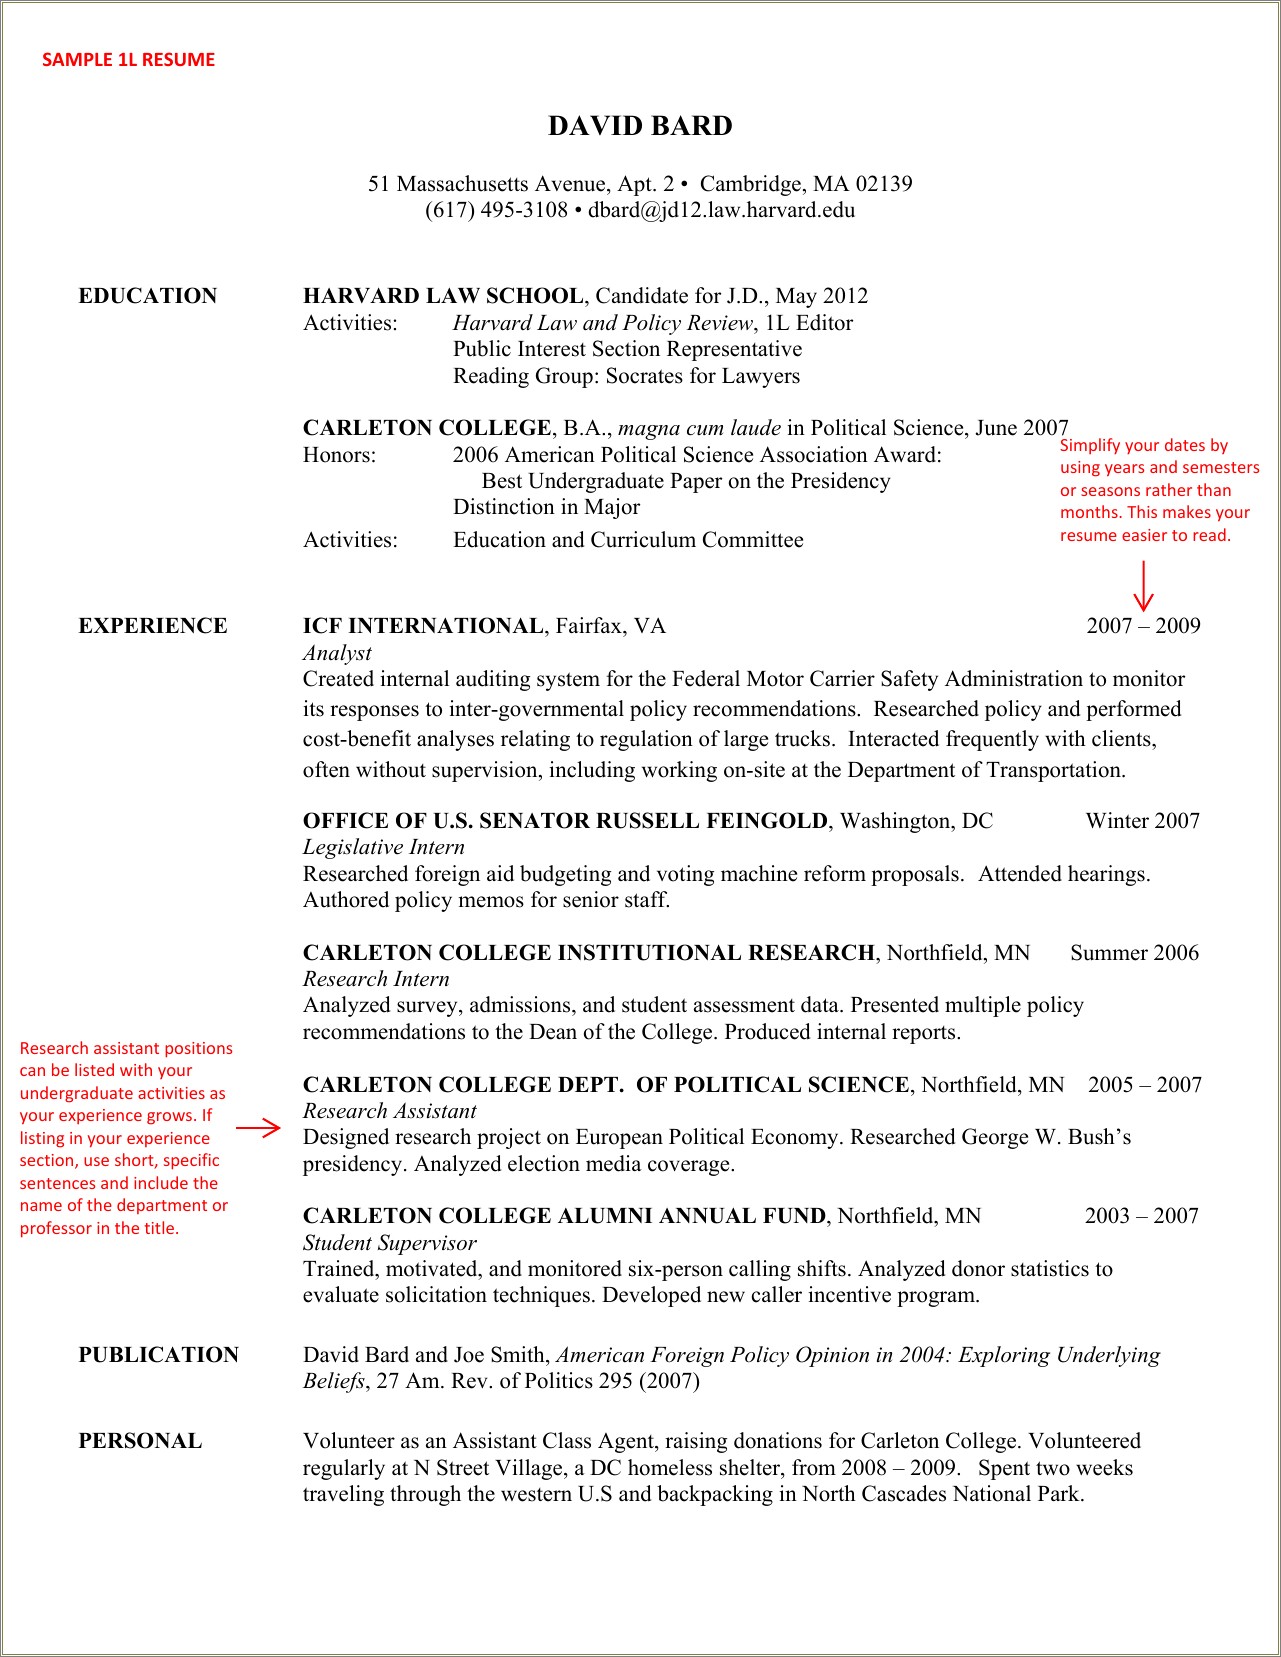 Sample Law School Resume For Admissions